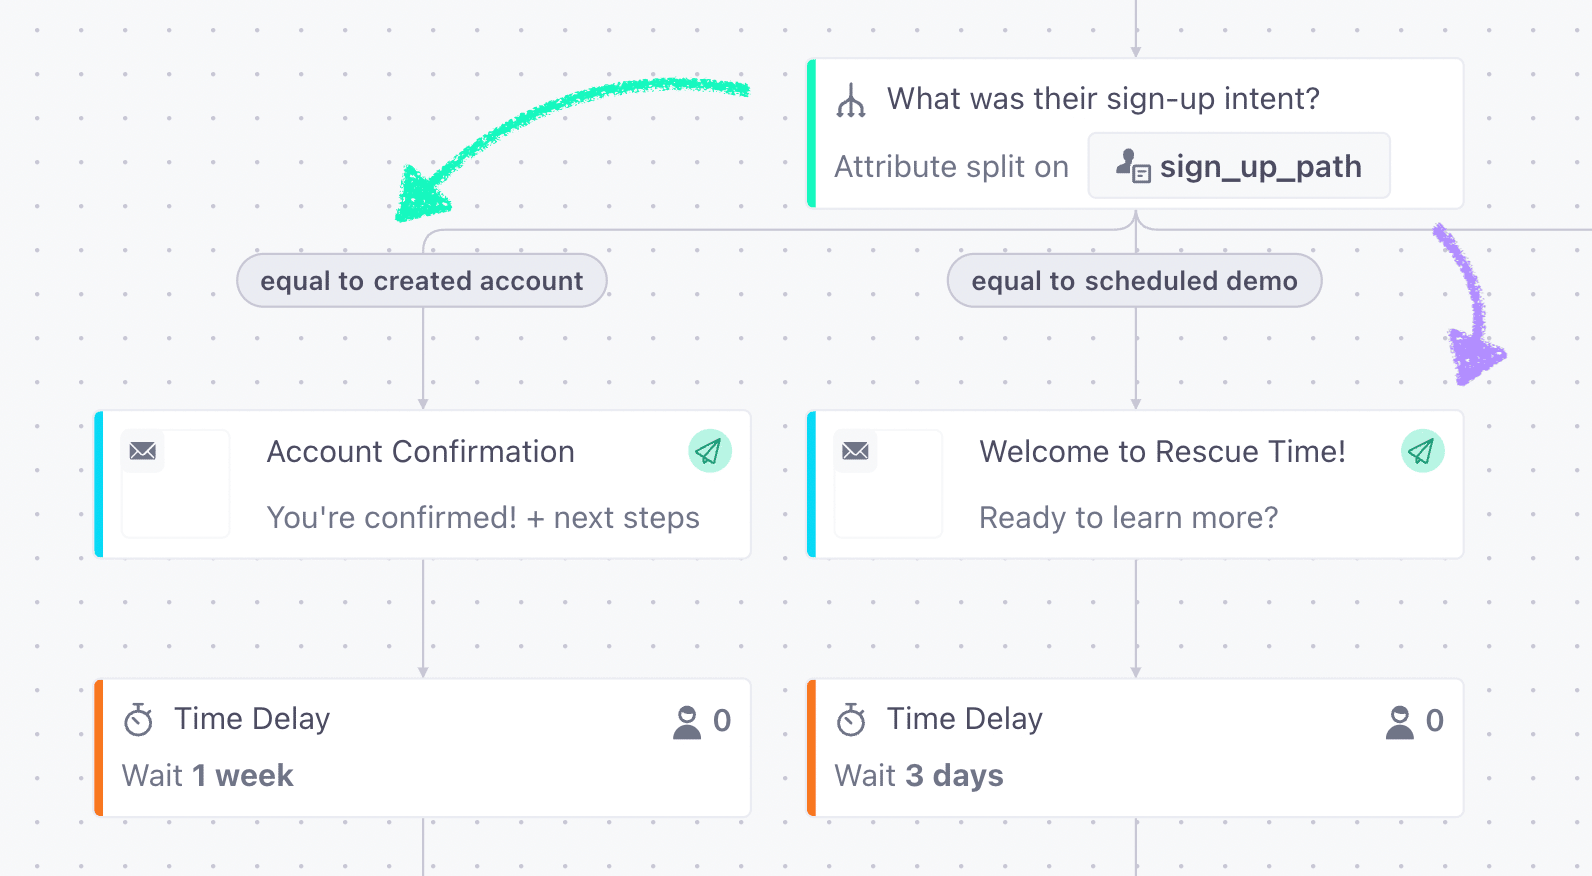 Screenshot of the Customer.io visual workflow builder, showing how this campaign splits leads based on sign up path — account creation or demo. 